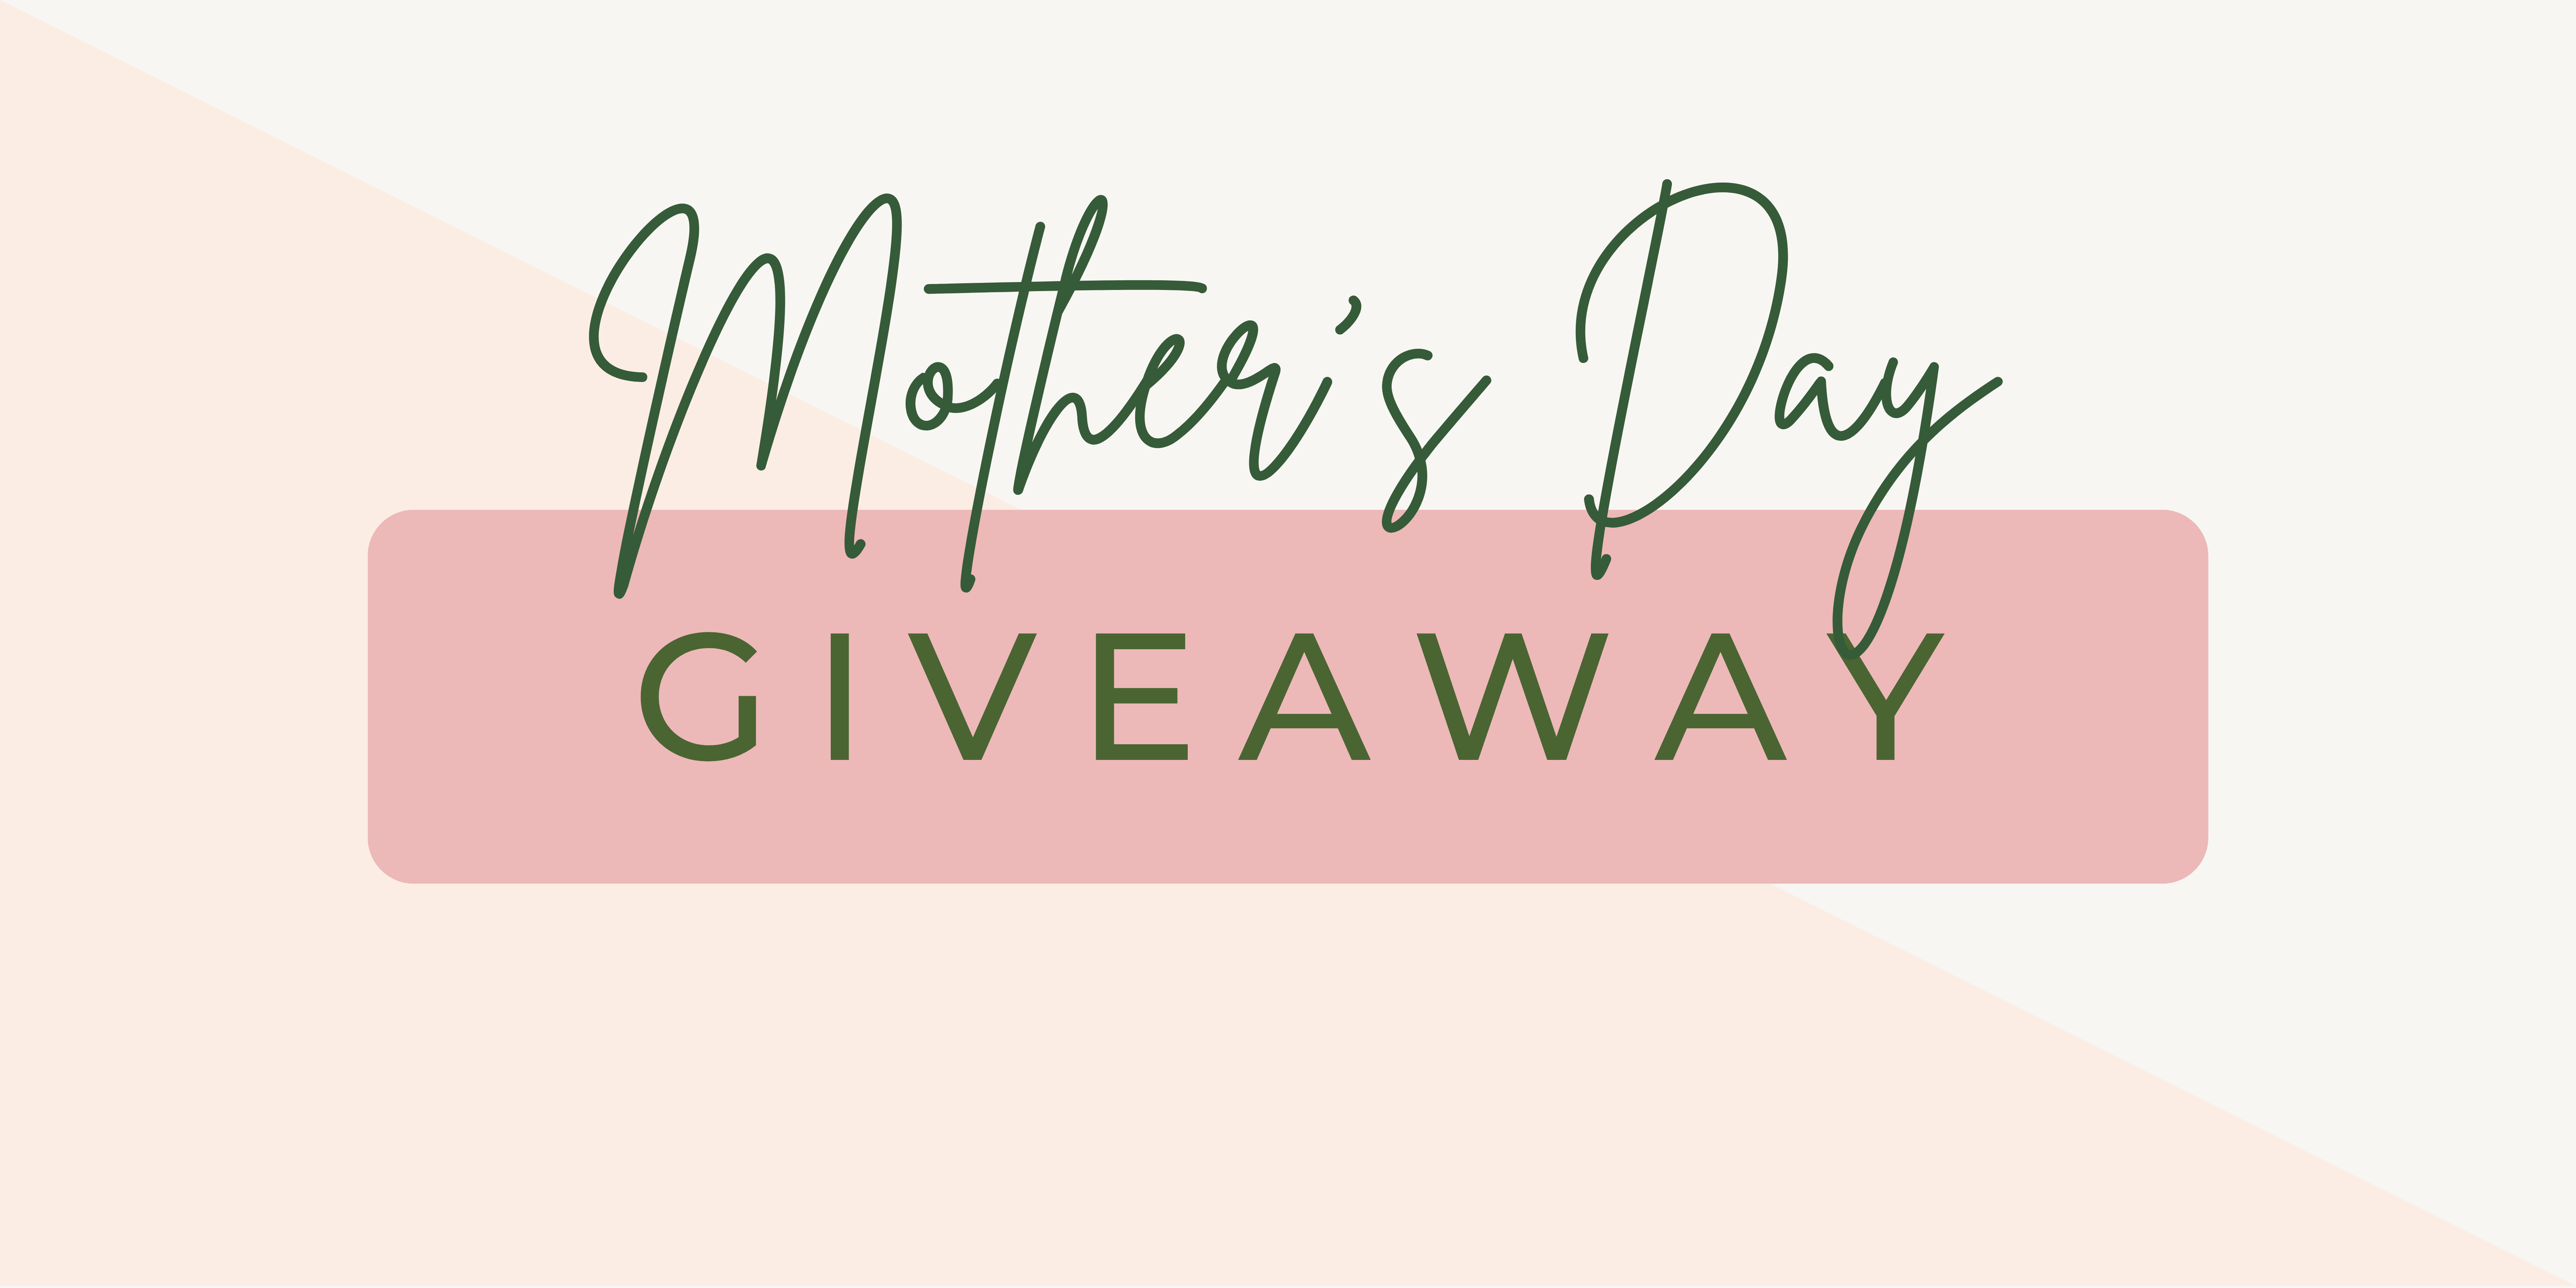 NOW CLOSED – Mother’s Day Giveaway and Gift Guide